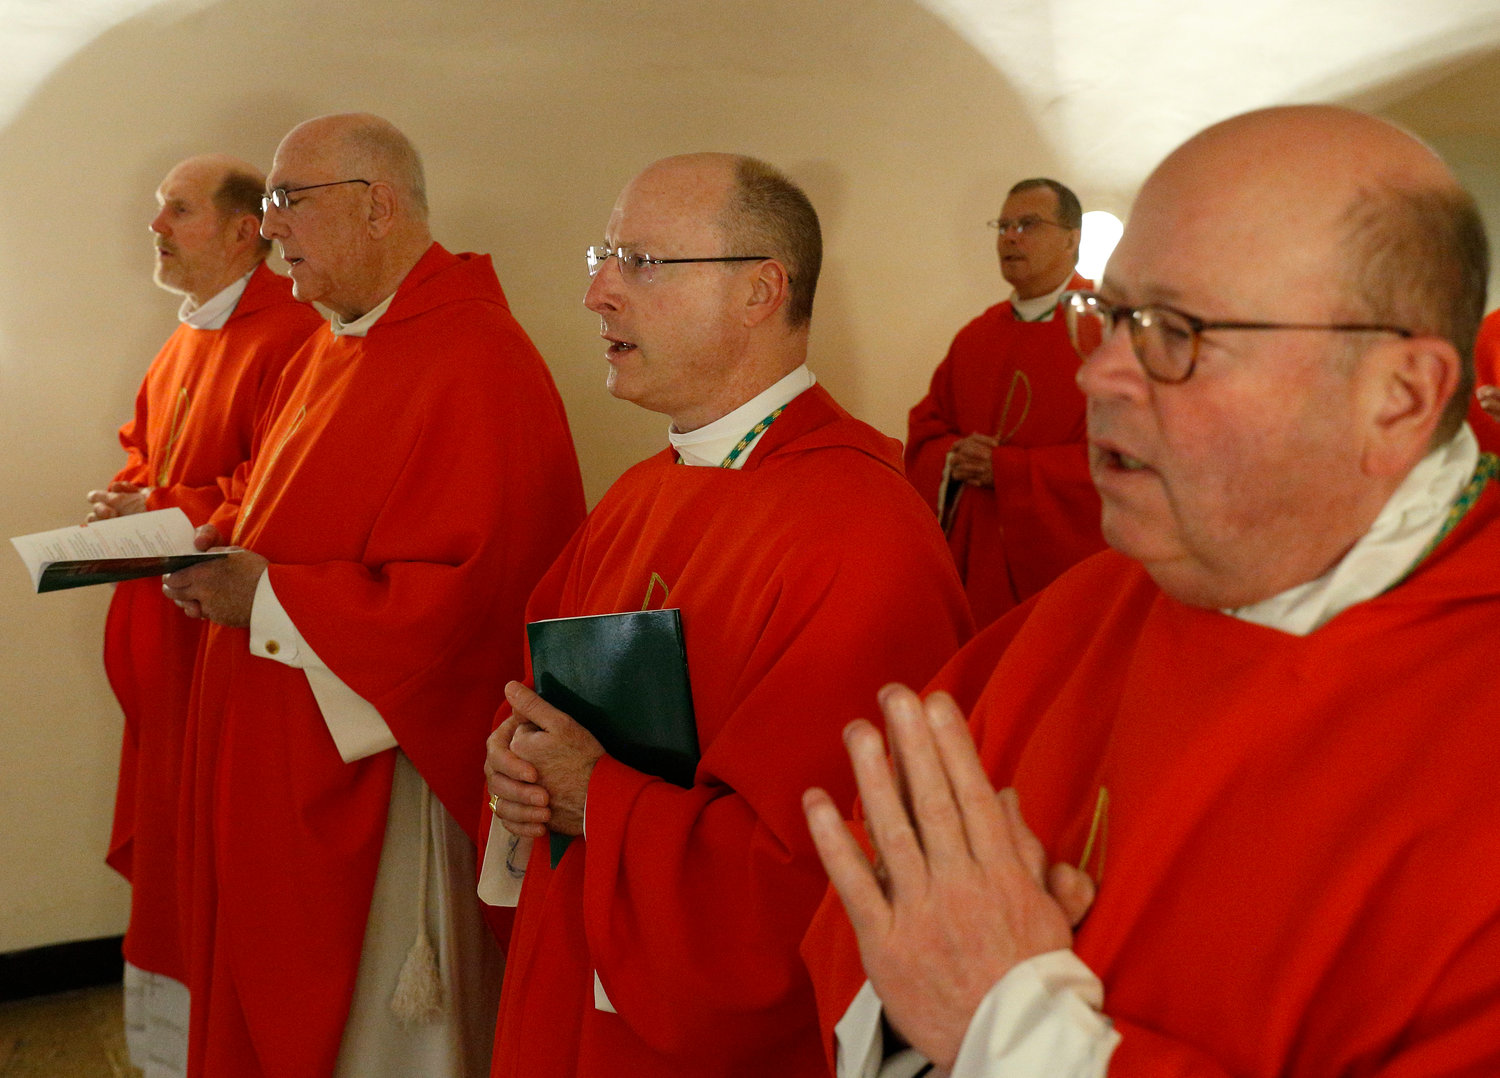 U.S. bishops concelebrate Mass in the crypt of St. Peter's Basilica at the Vatican Jan. 16, 2020. Pictured from left in the first row are Bishop Thomas R. Zinkula of Davenport, Iowa; Archbishop Joseph F. Naumann of Kansas City, Kan.; Bishop W. Shawn McKnight of Jefferson City, Mo.; and Bishop Carl A. Kemme of Wichita, Kan. Bishops from Iowa, Kansas, Missouri and Nebraska were making their "ad limina" visits to the Vatican to report on the status of their dioceses to the pope and Vatican officials.